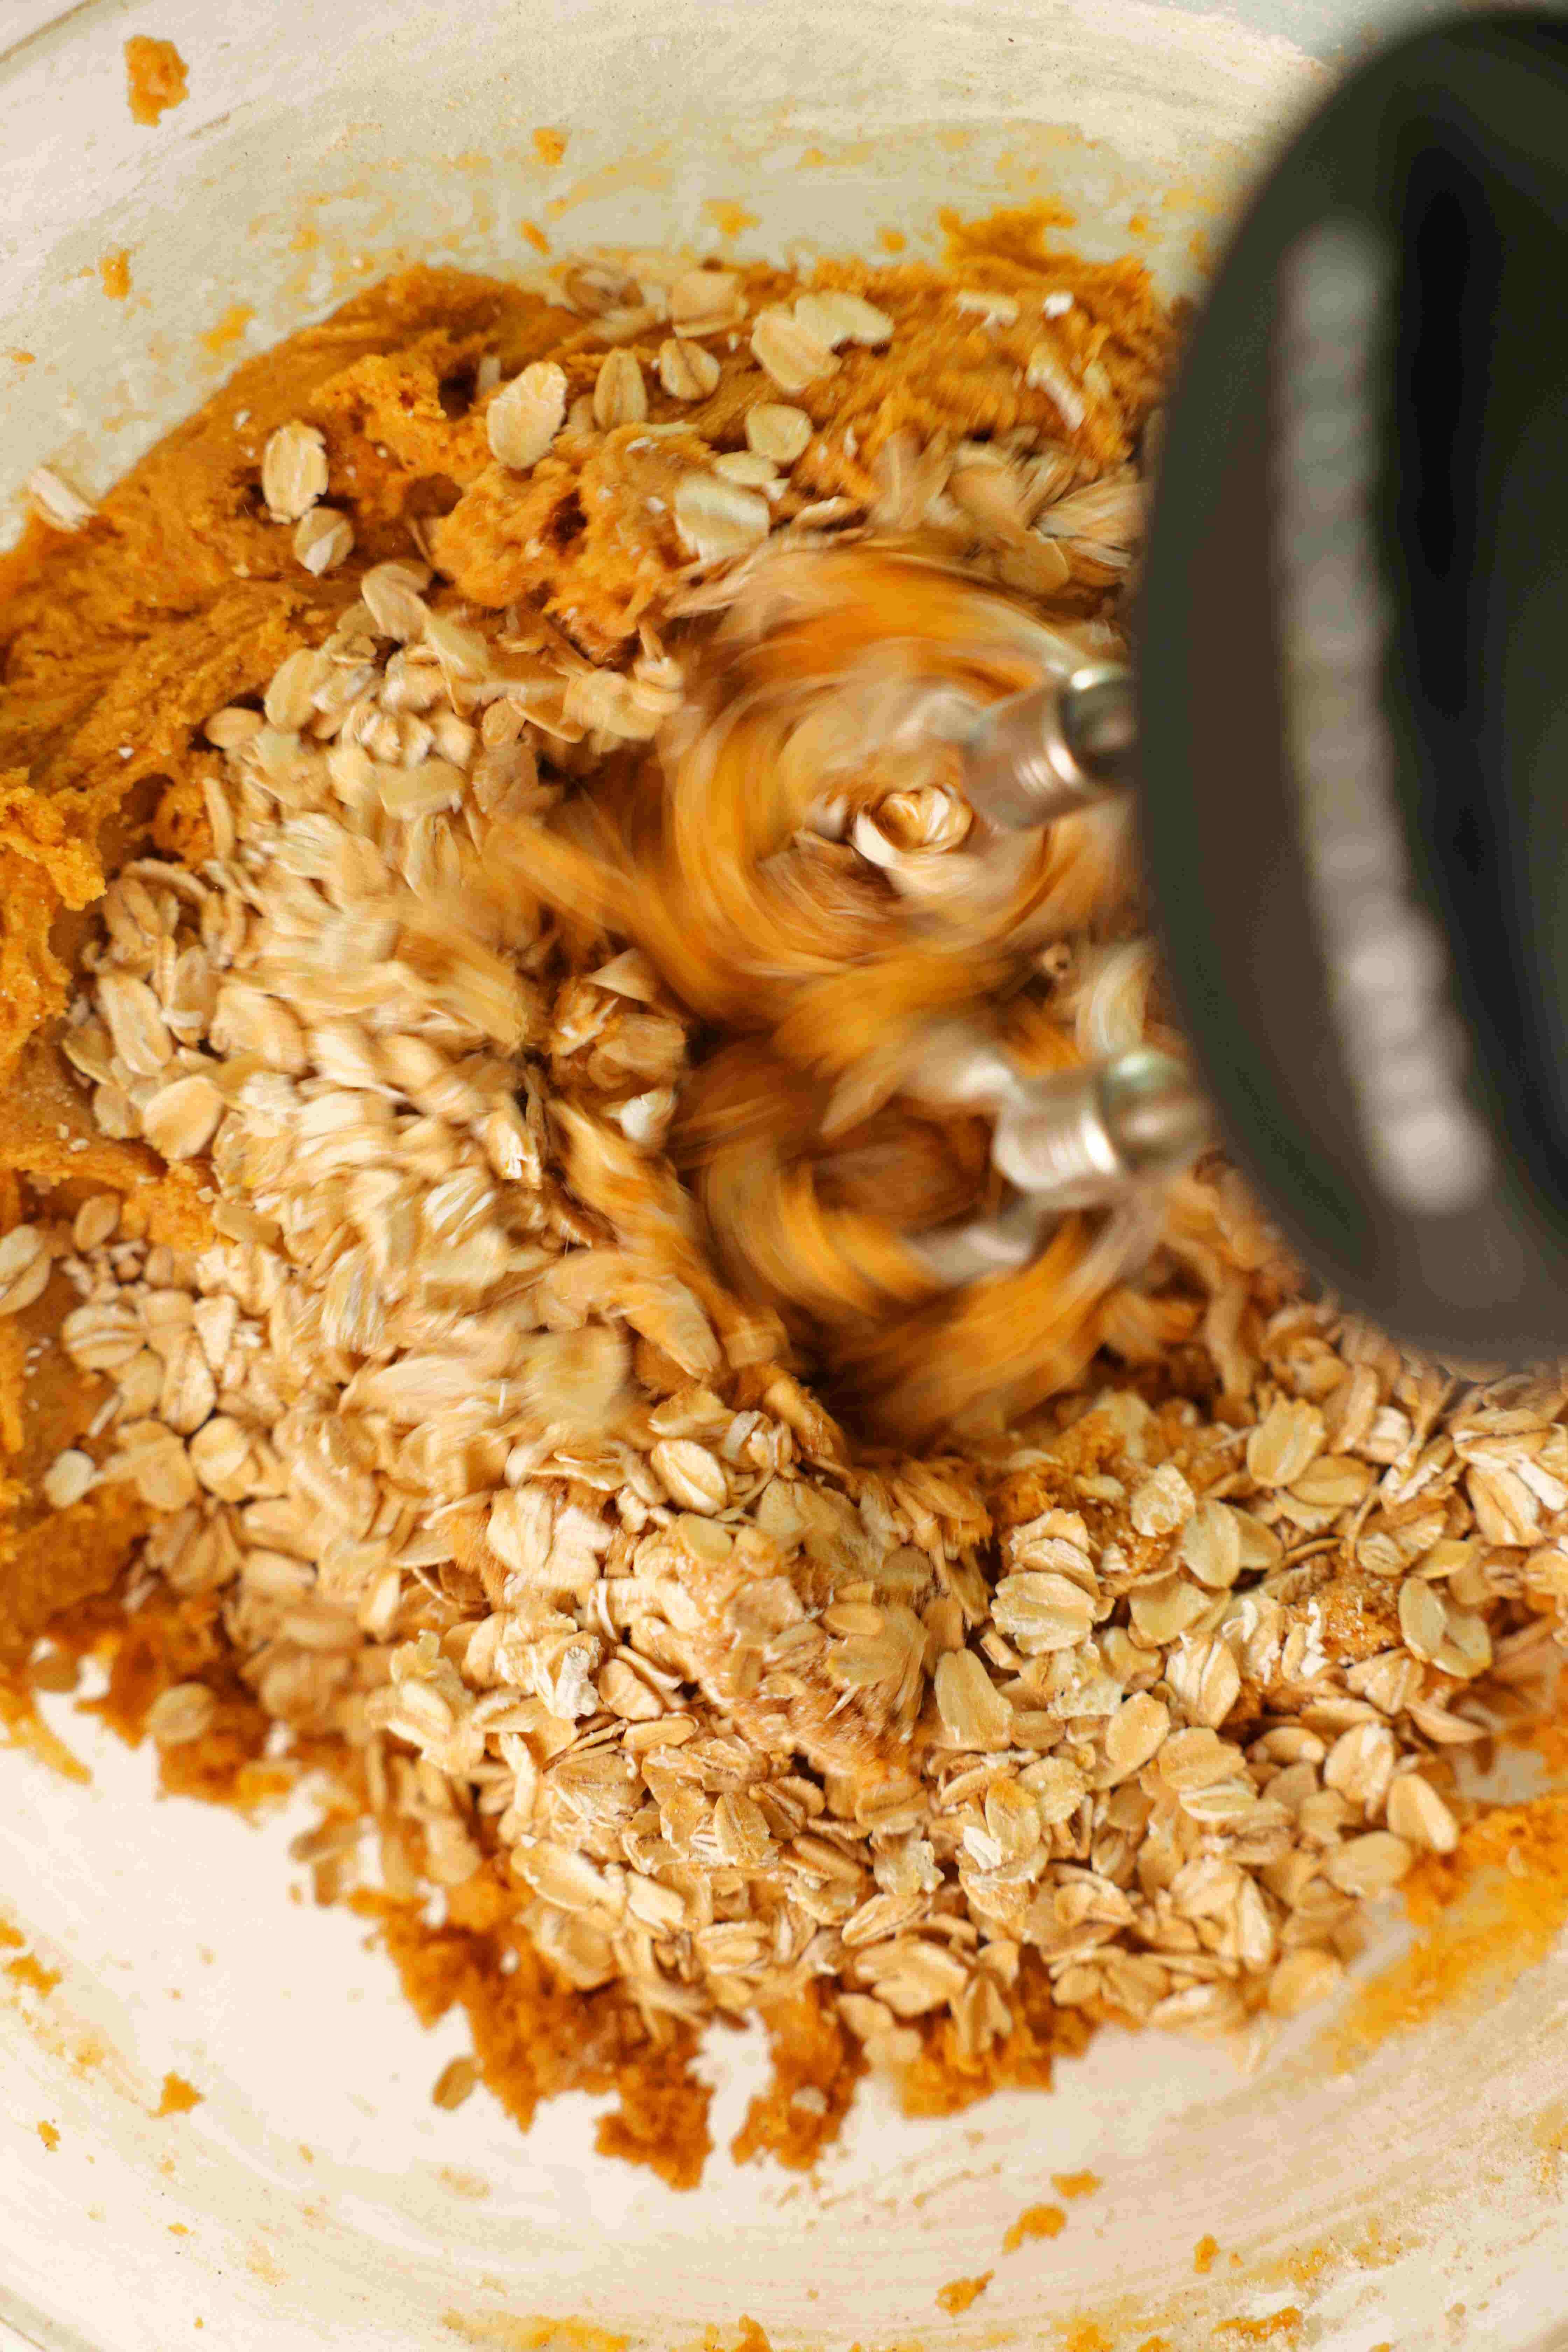 Stand-mixer combining oat and pumpkin puree in a mixing bowl.